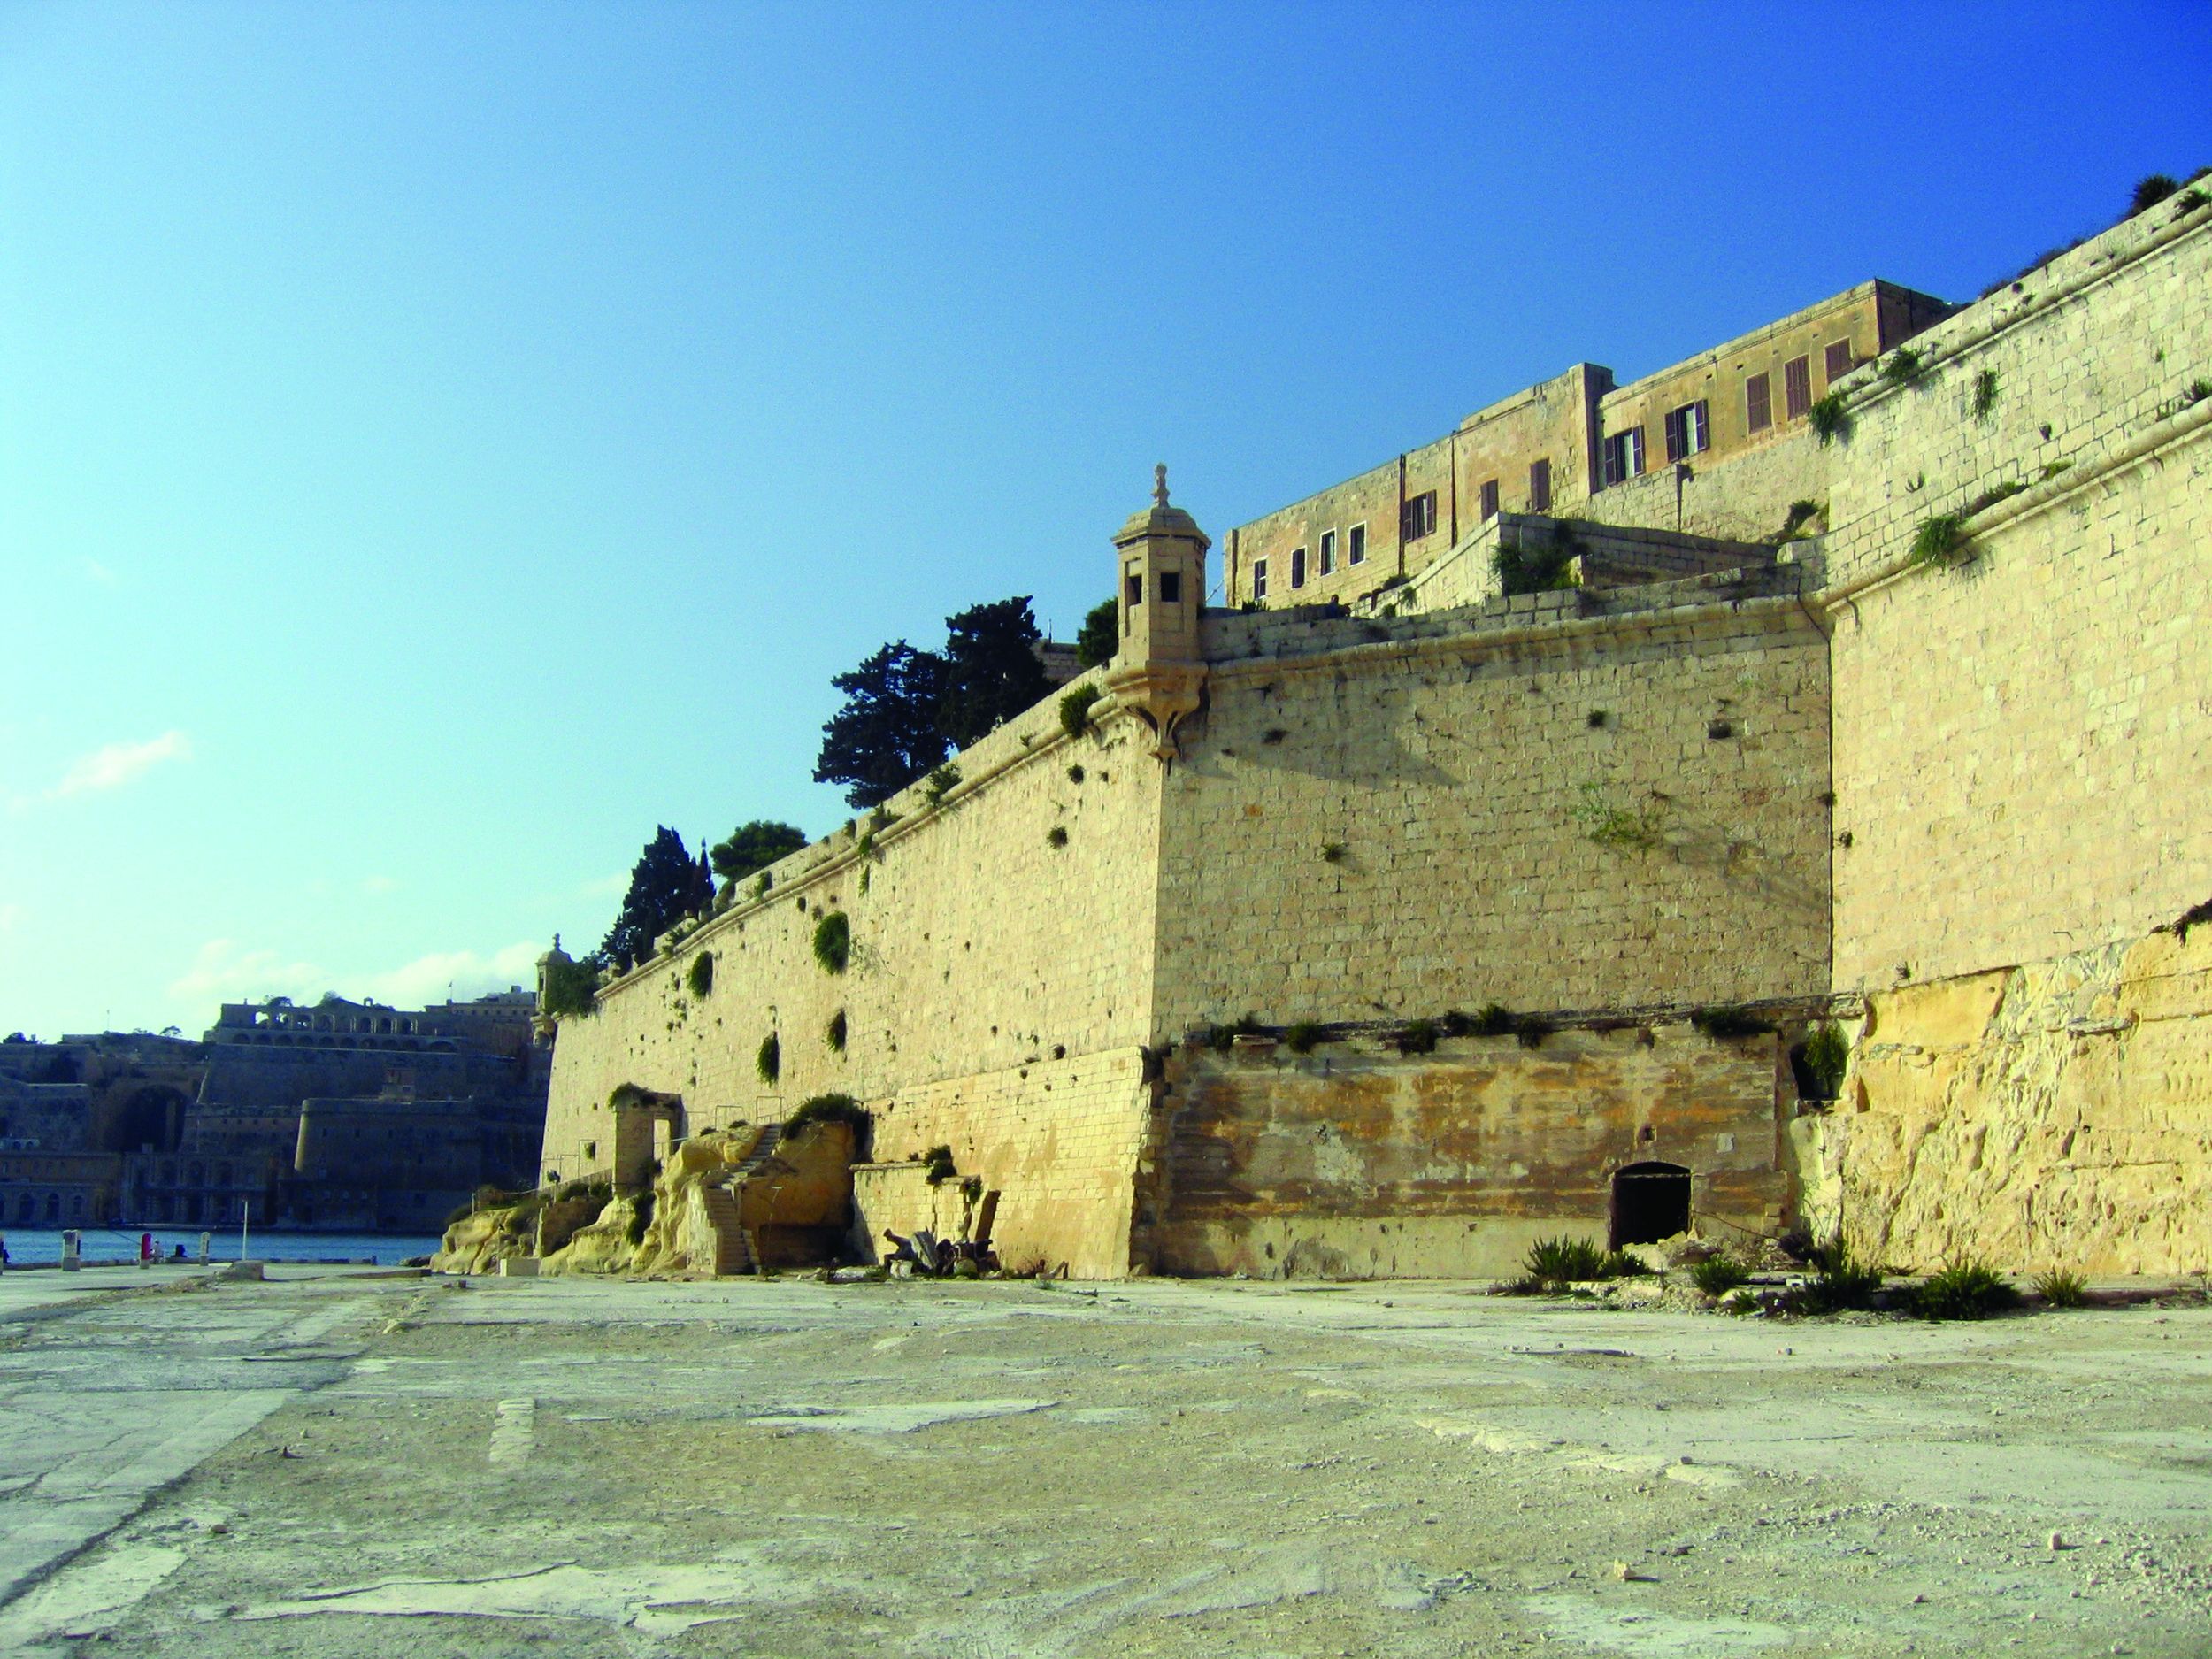 The west face of Malta’s seaward bastion, Castle St. Angelo, today. The Order’s Council of Elders met in a chamber above the castle.